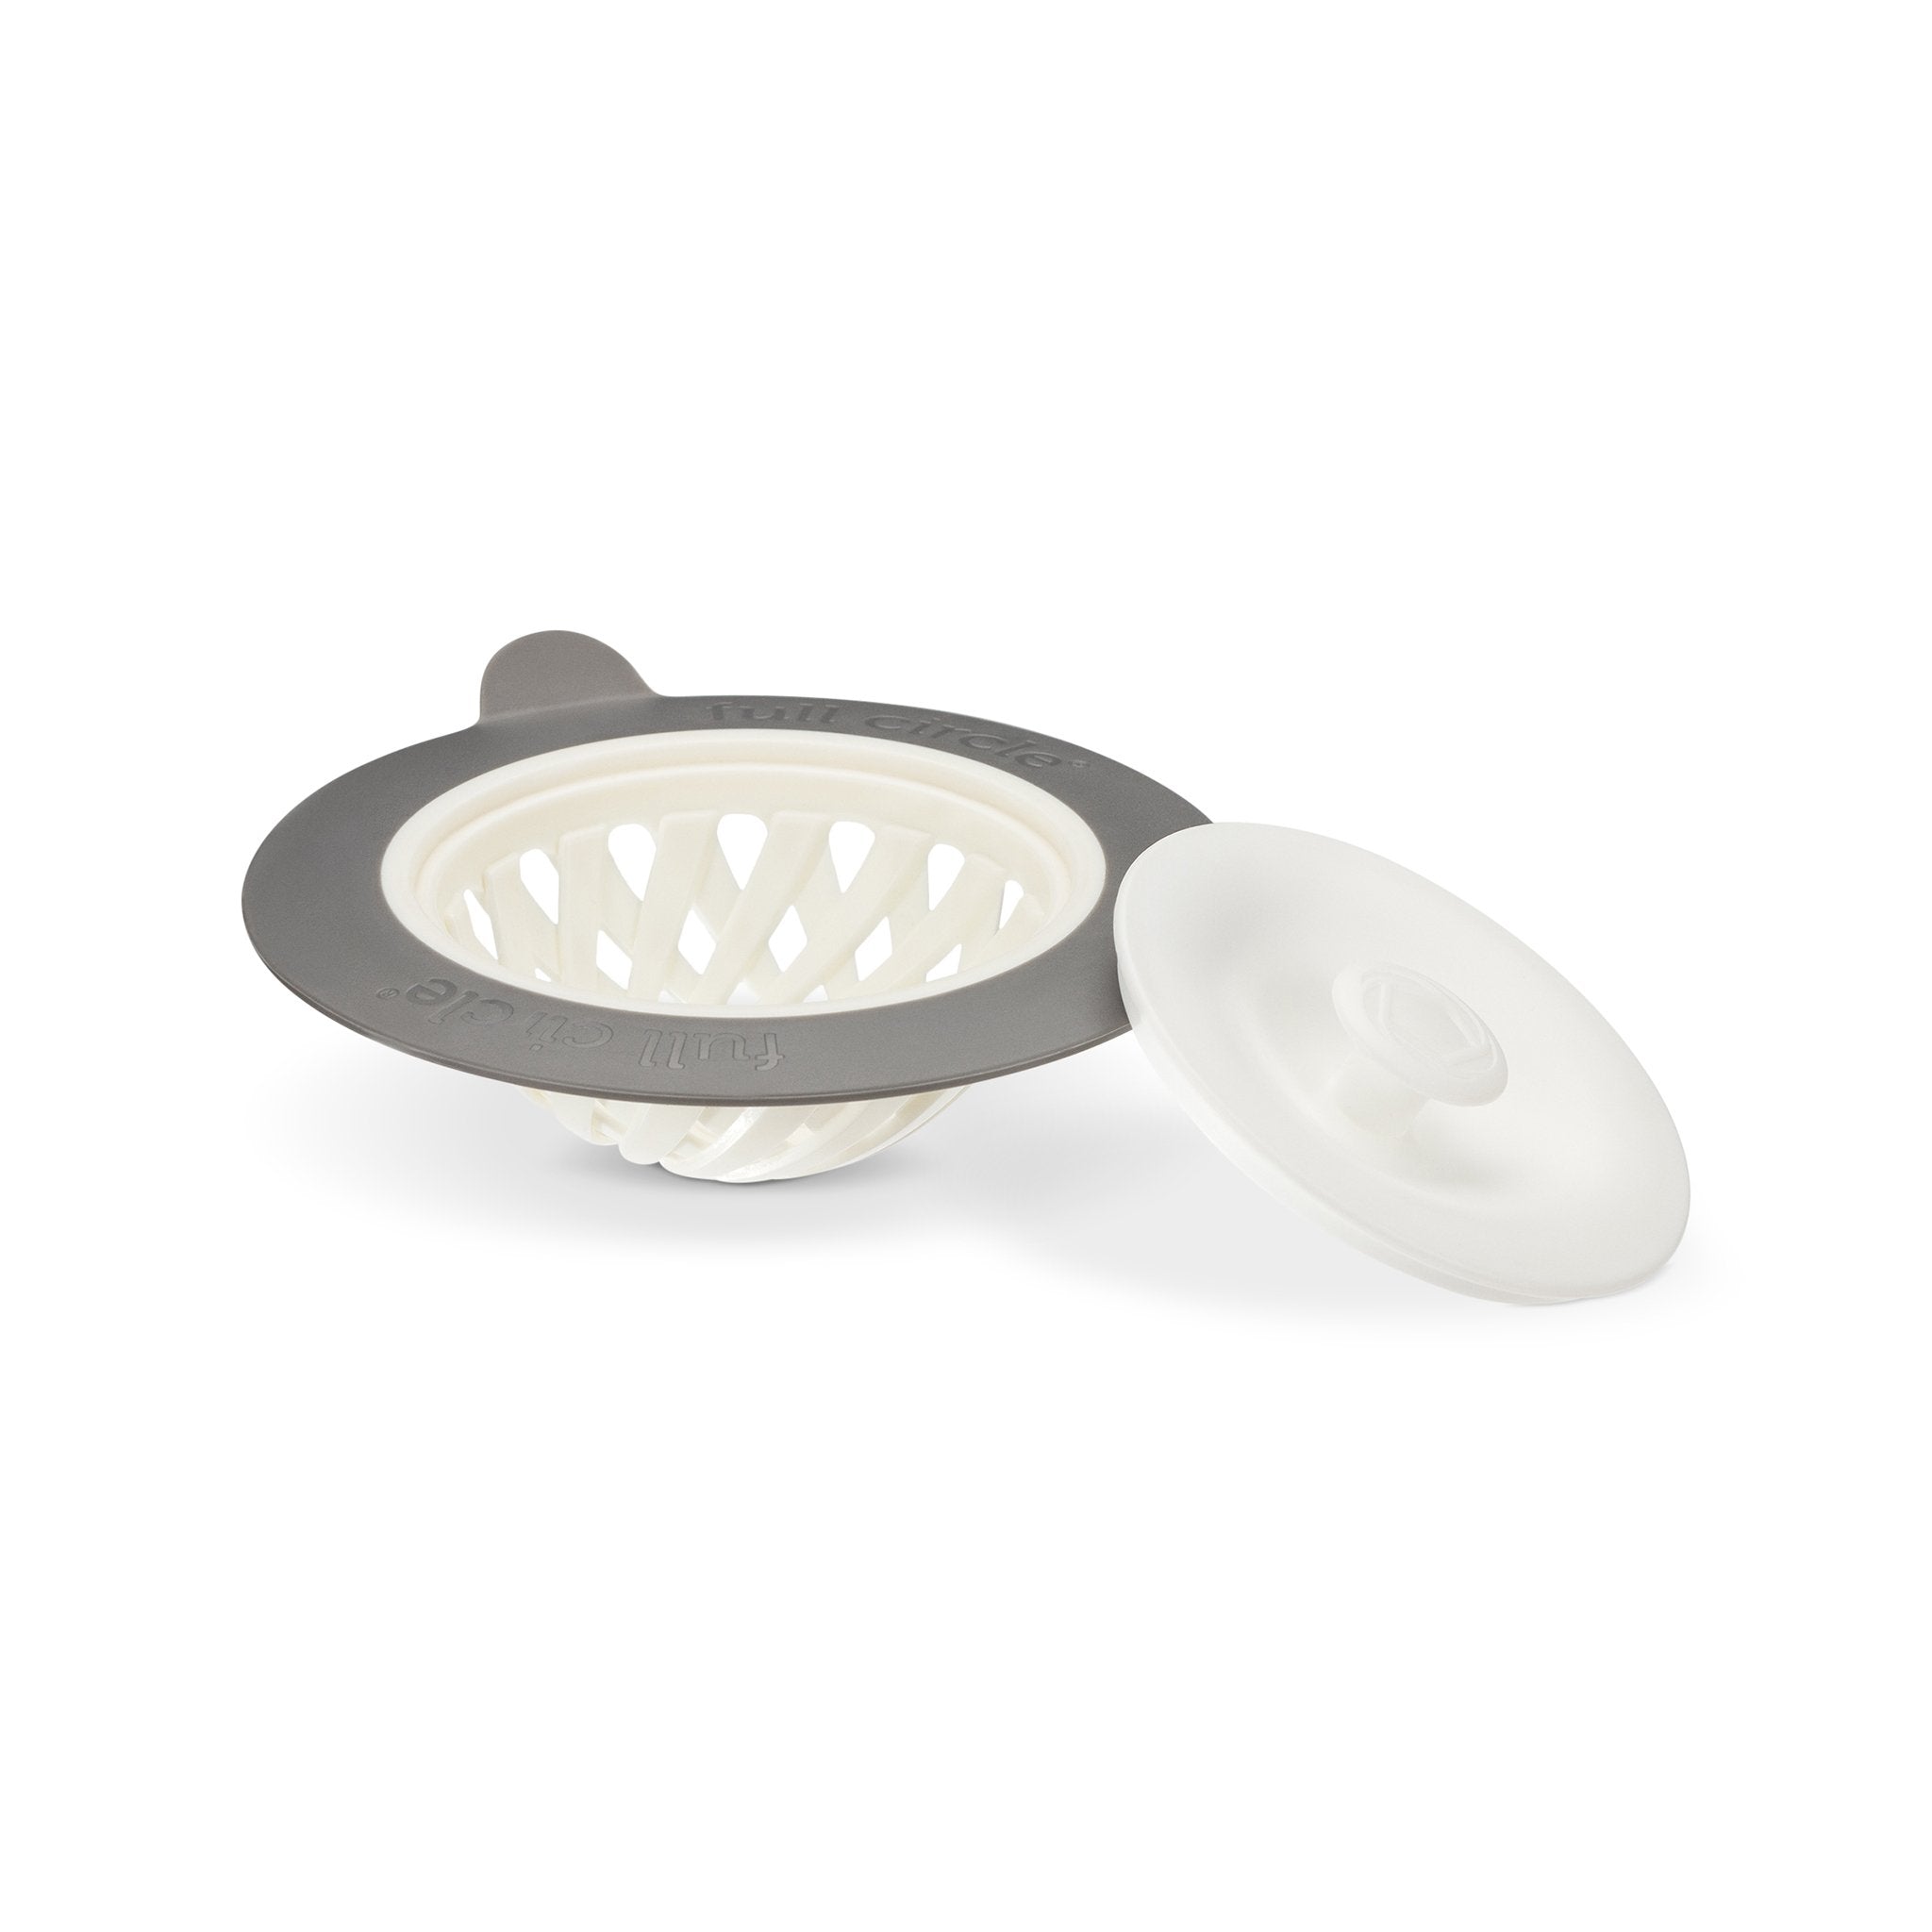 Full Circle Sink Strainer, Stopper, Recycled Plastic – Full Circle